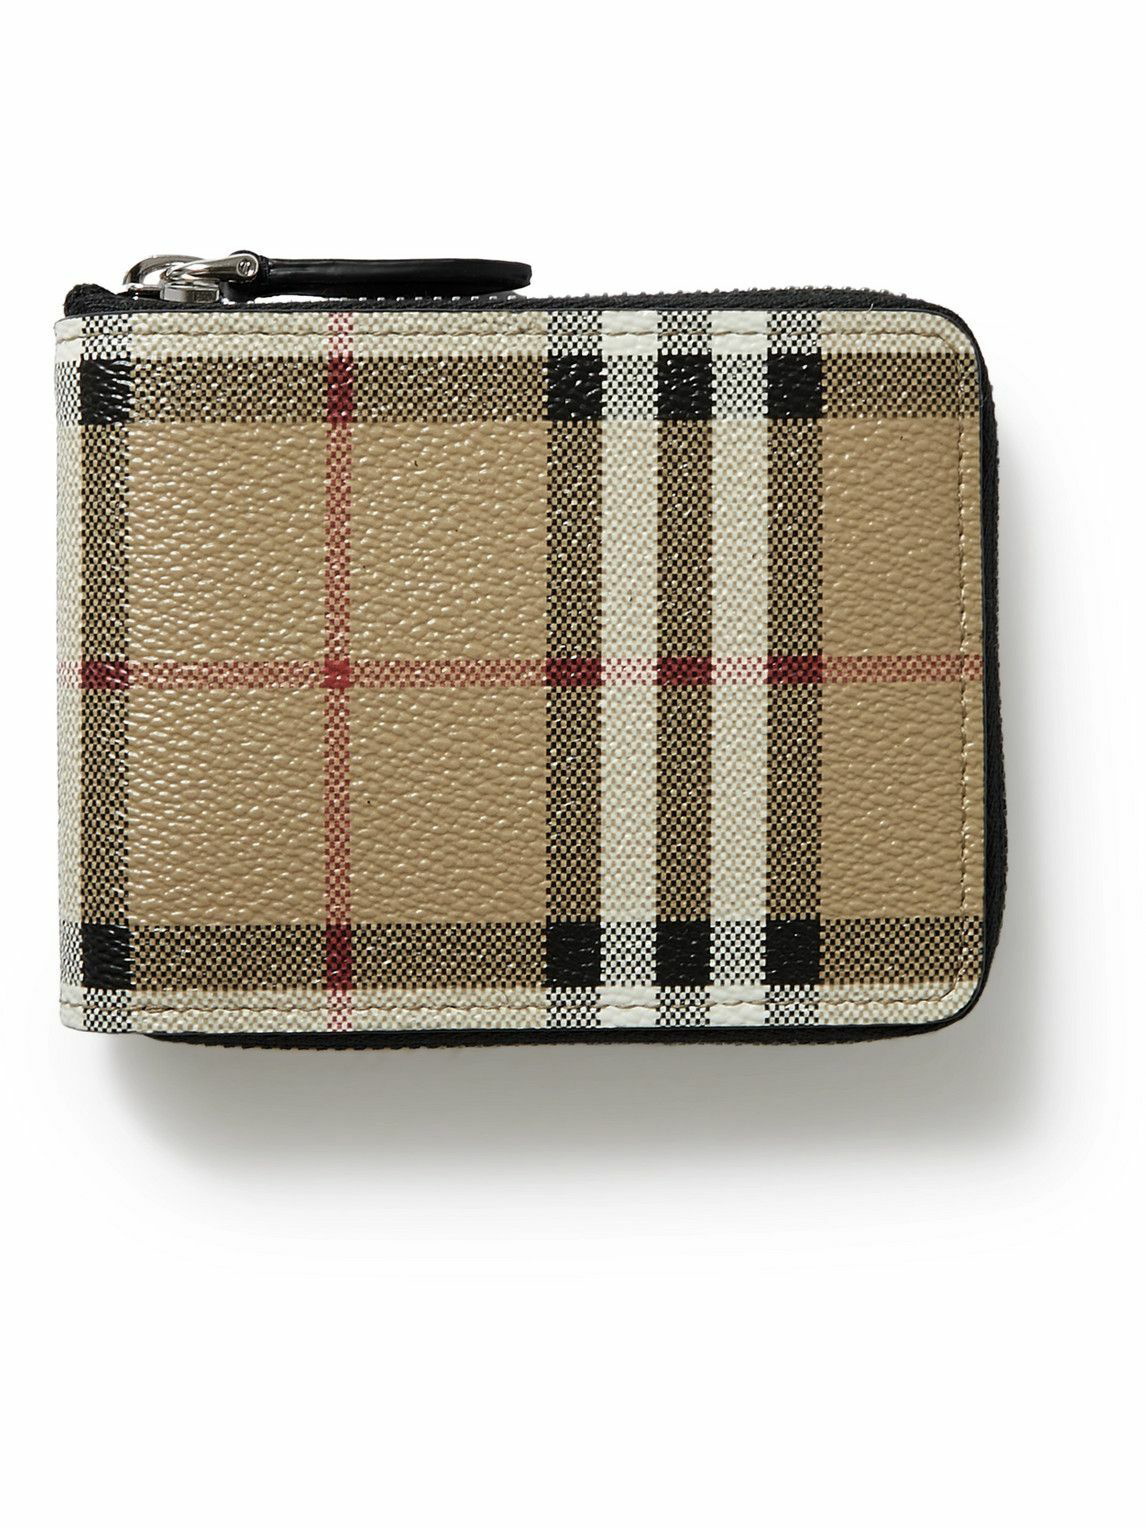 Burberry - Leather-Trimmed Checked Coated-Canvas Wallet Burberry